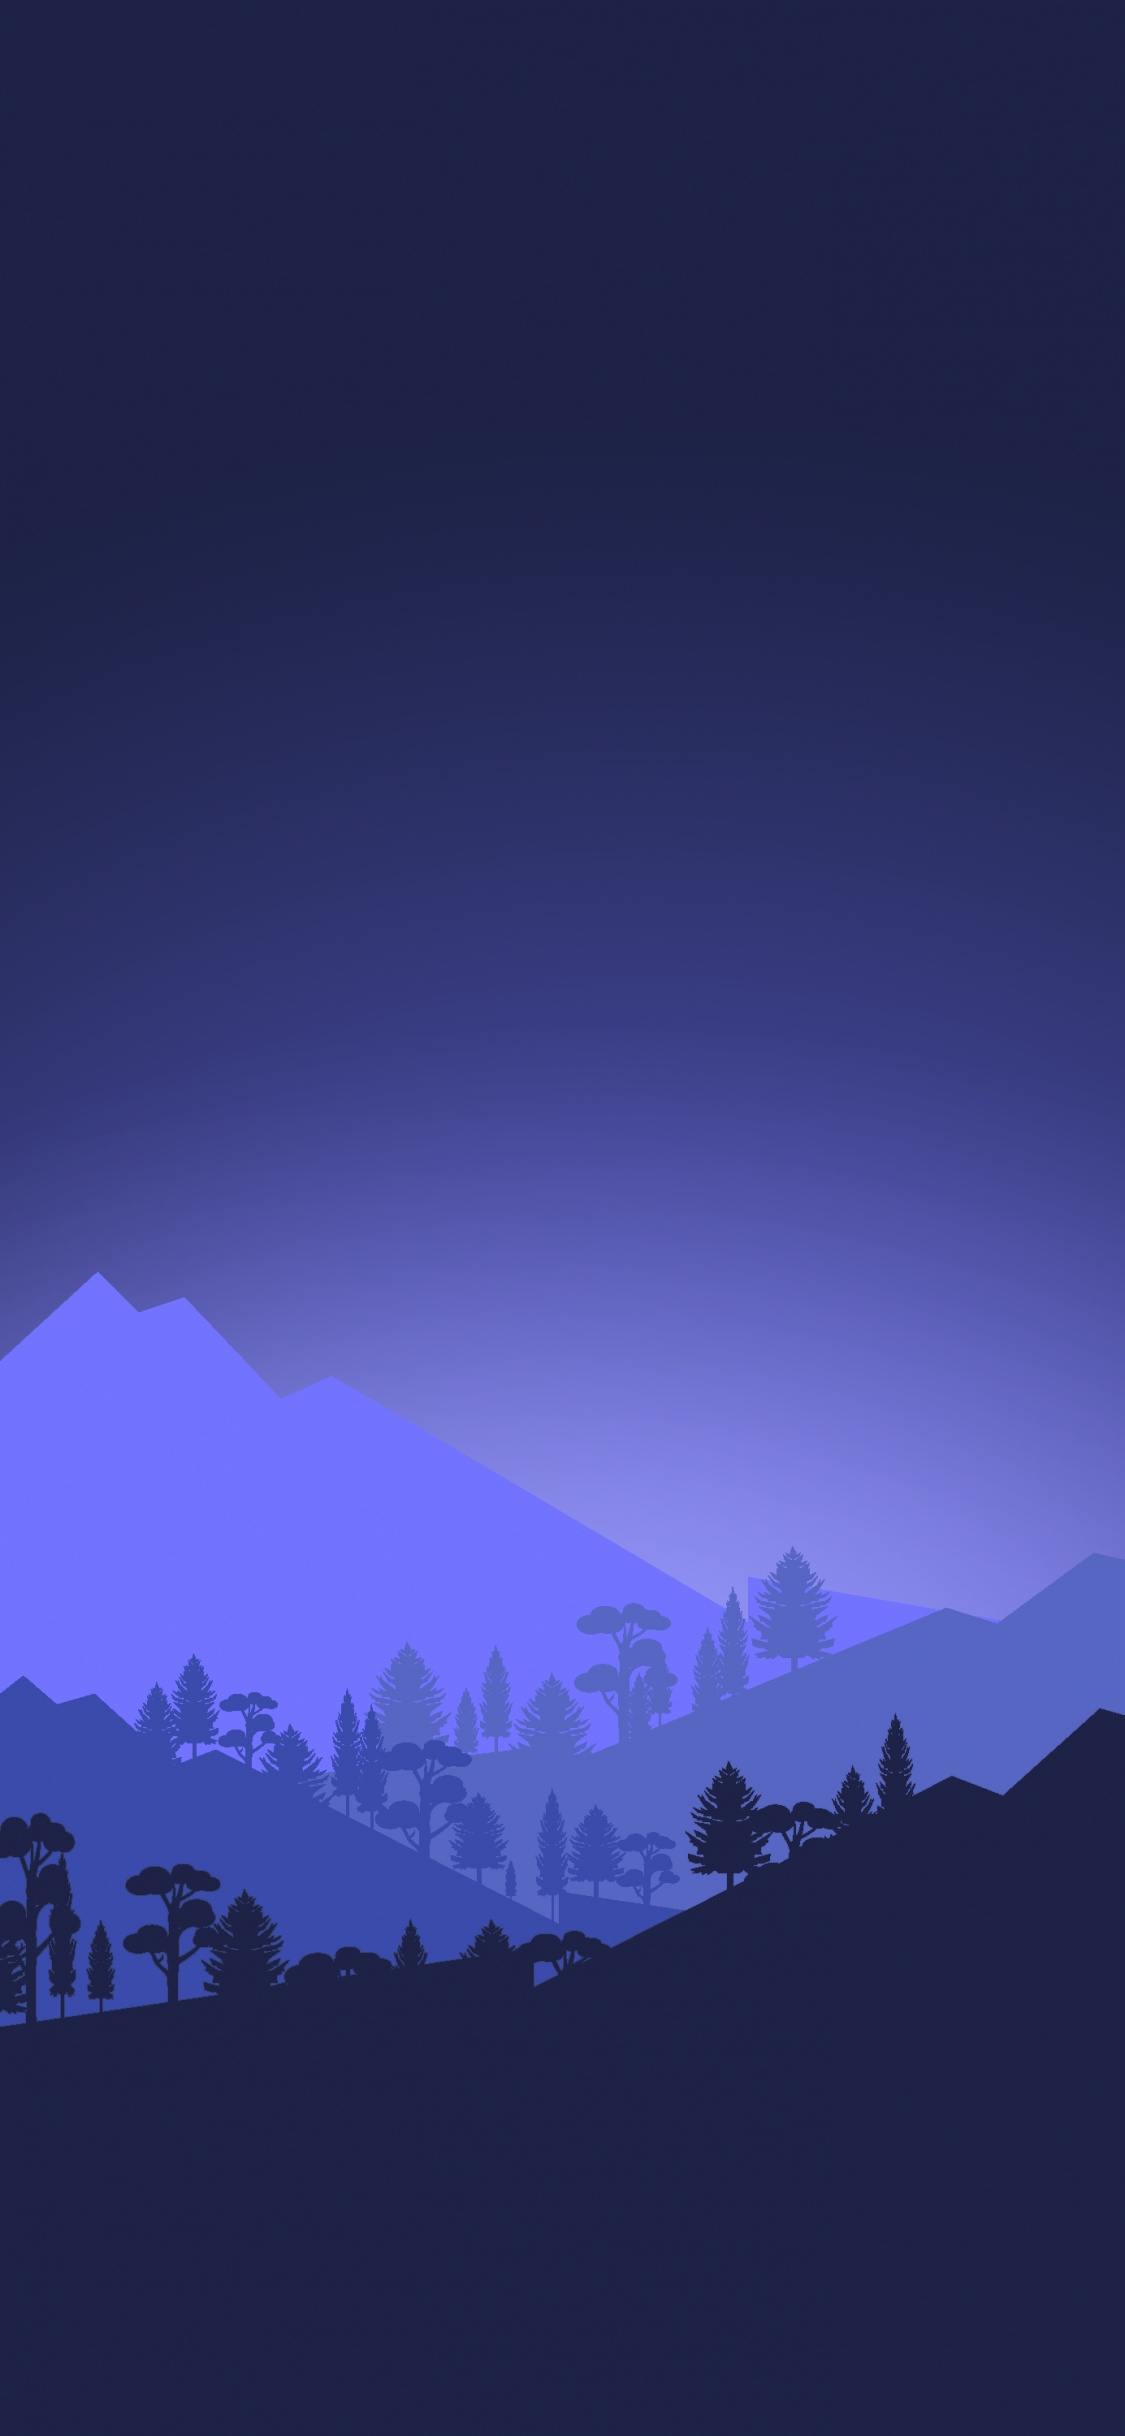 Ios, Smartphone, Apples, Mountain, Atmosphere. Wallpaper in 1125x2436 Resolution